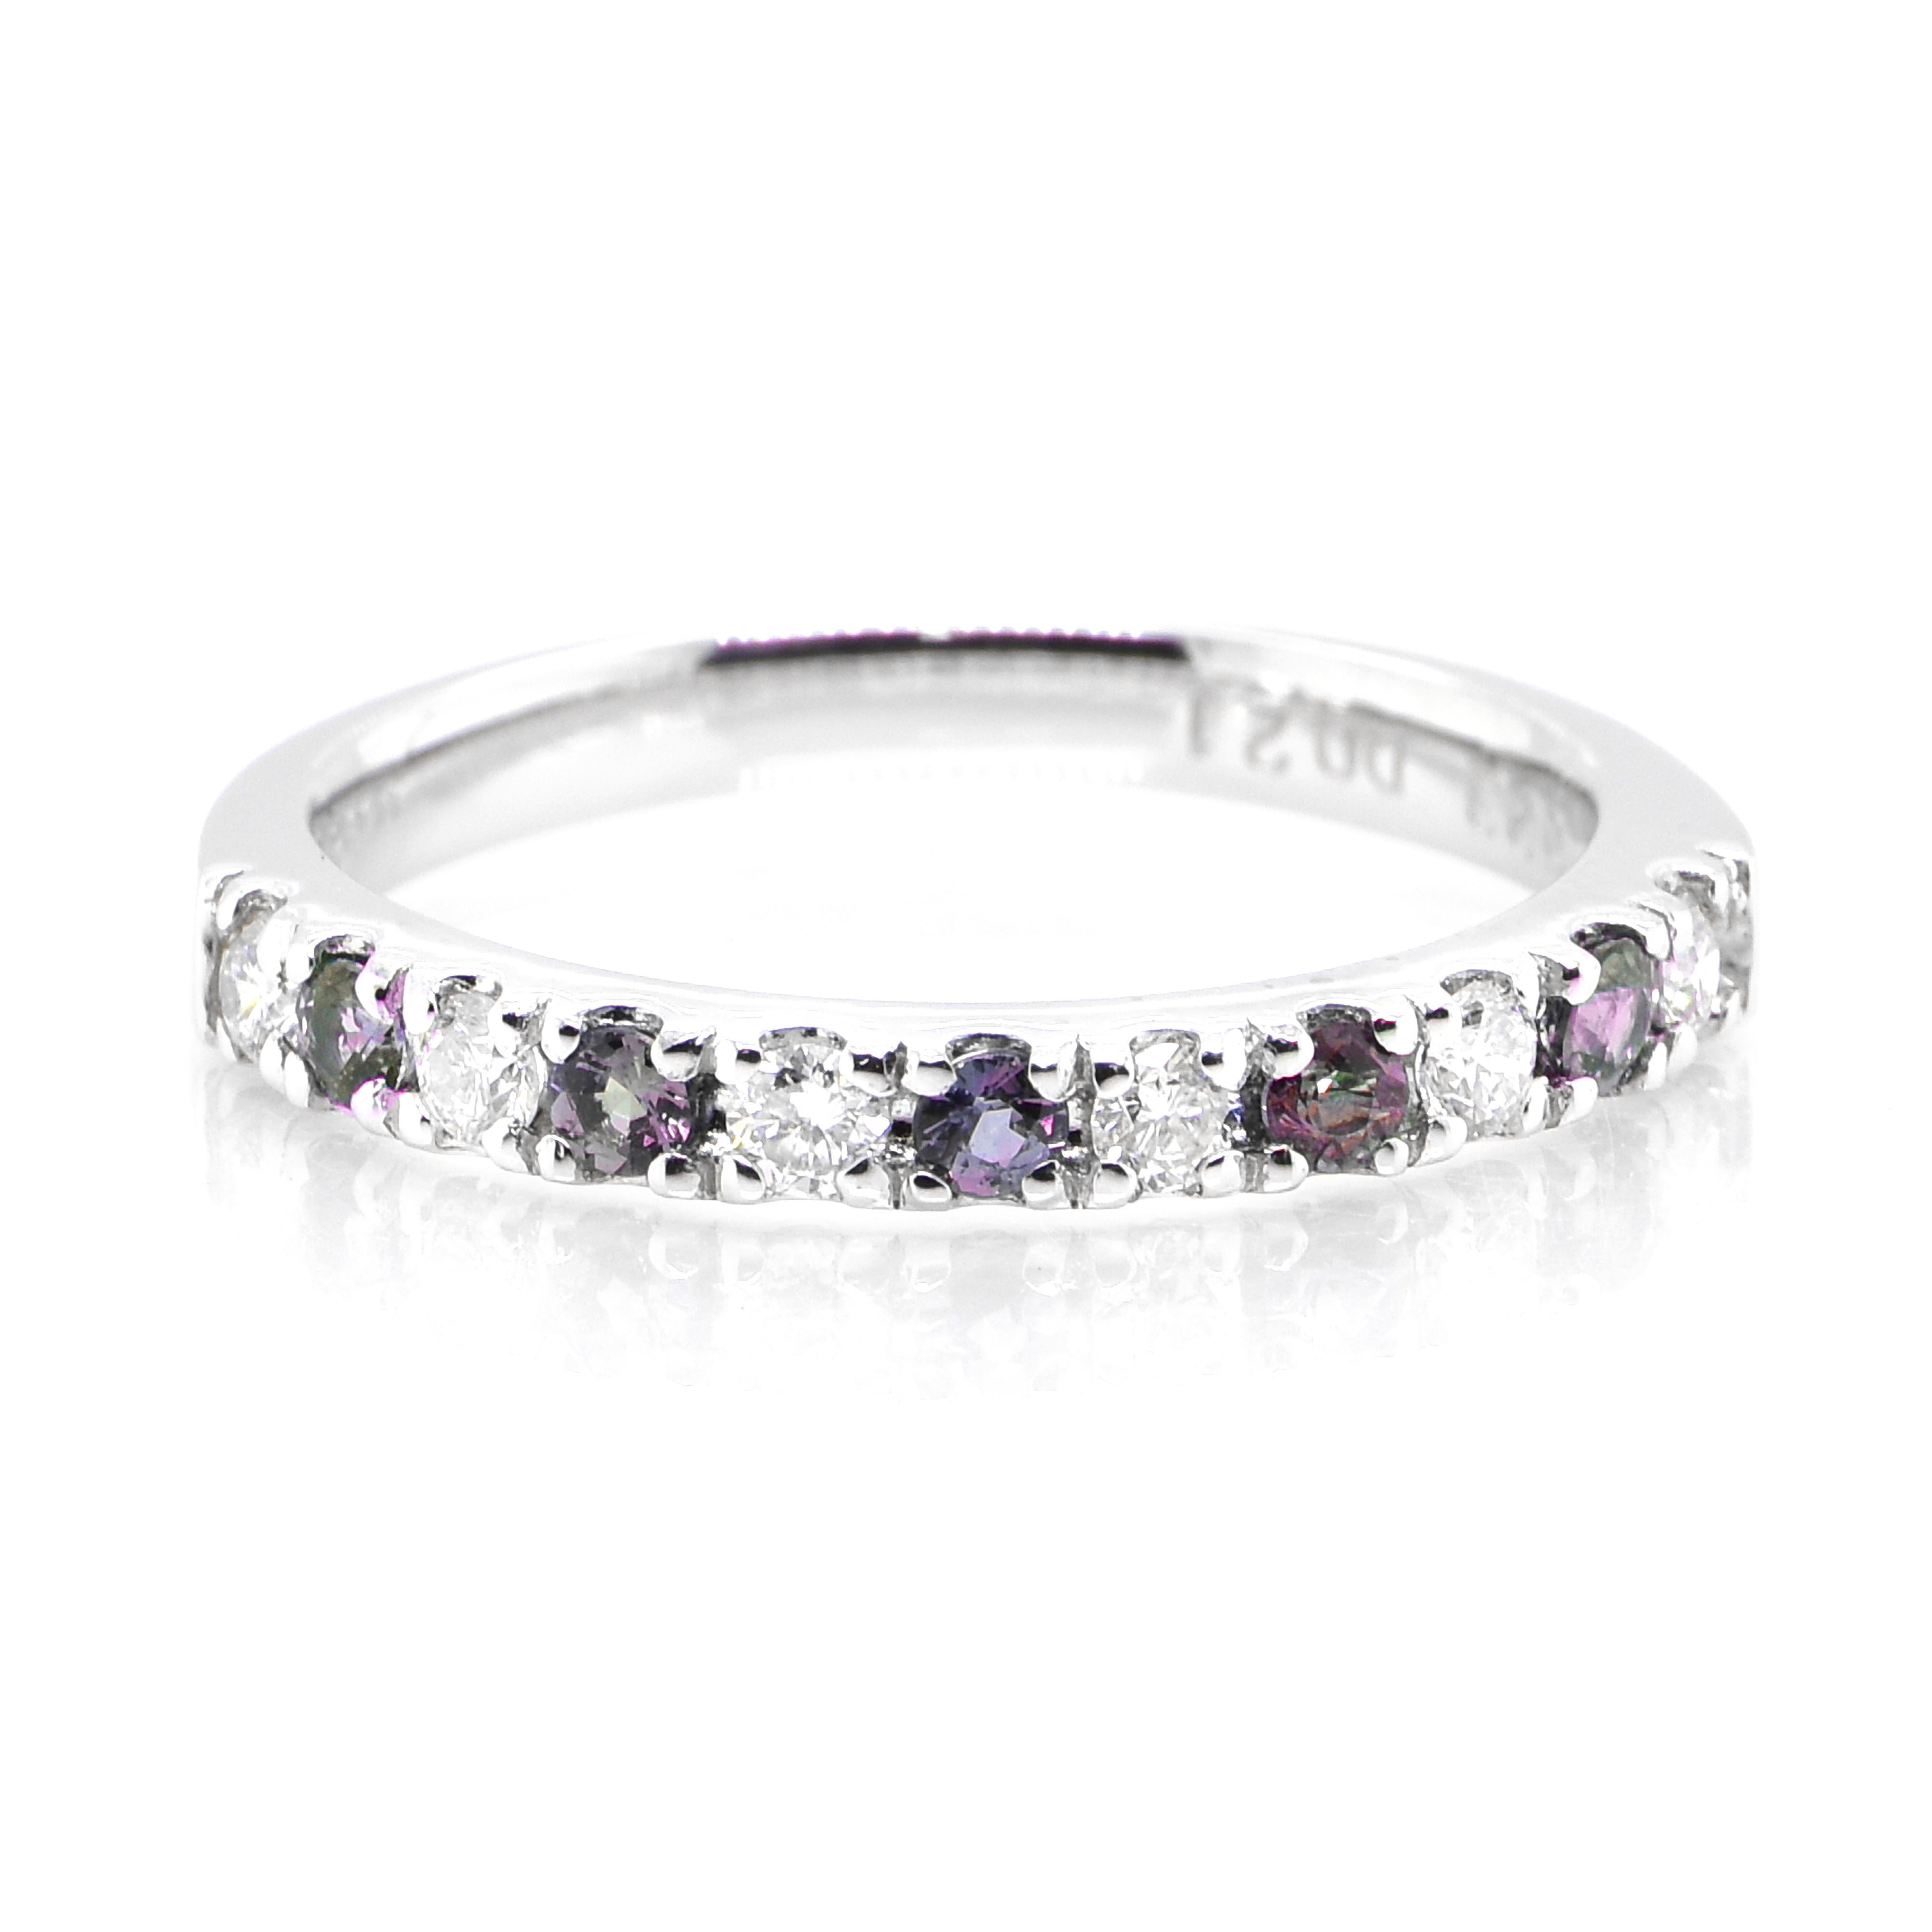 A gorgeous ring featuring 0.23 Carat, Natural Alexandrite and 0.21 Carats of Diamond Accents set in Platinum. Alexandrites produce a natural color-change phenomenon as they exhibit a Bluish Green Color under Fluorescent Light whereas a Purplish Red